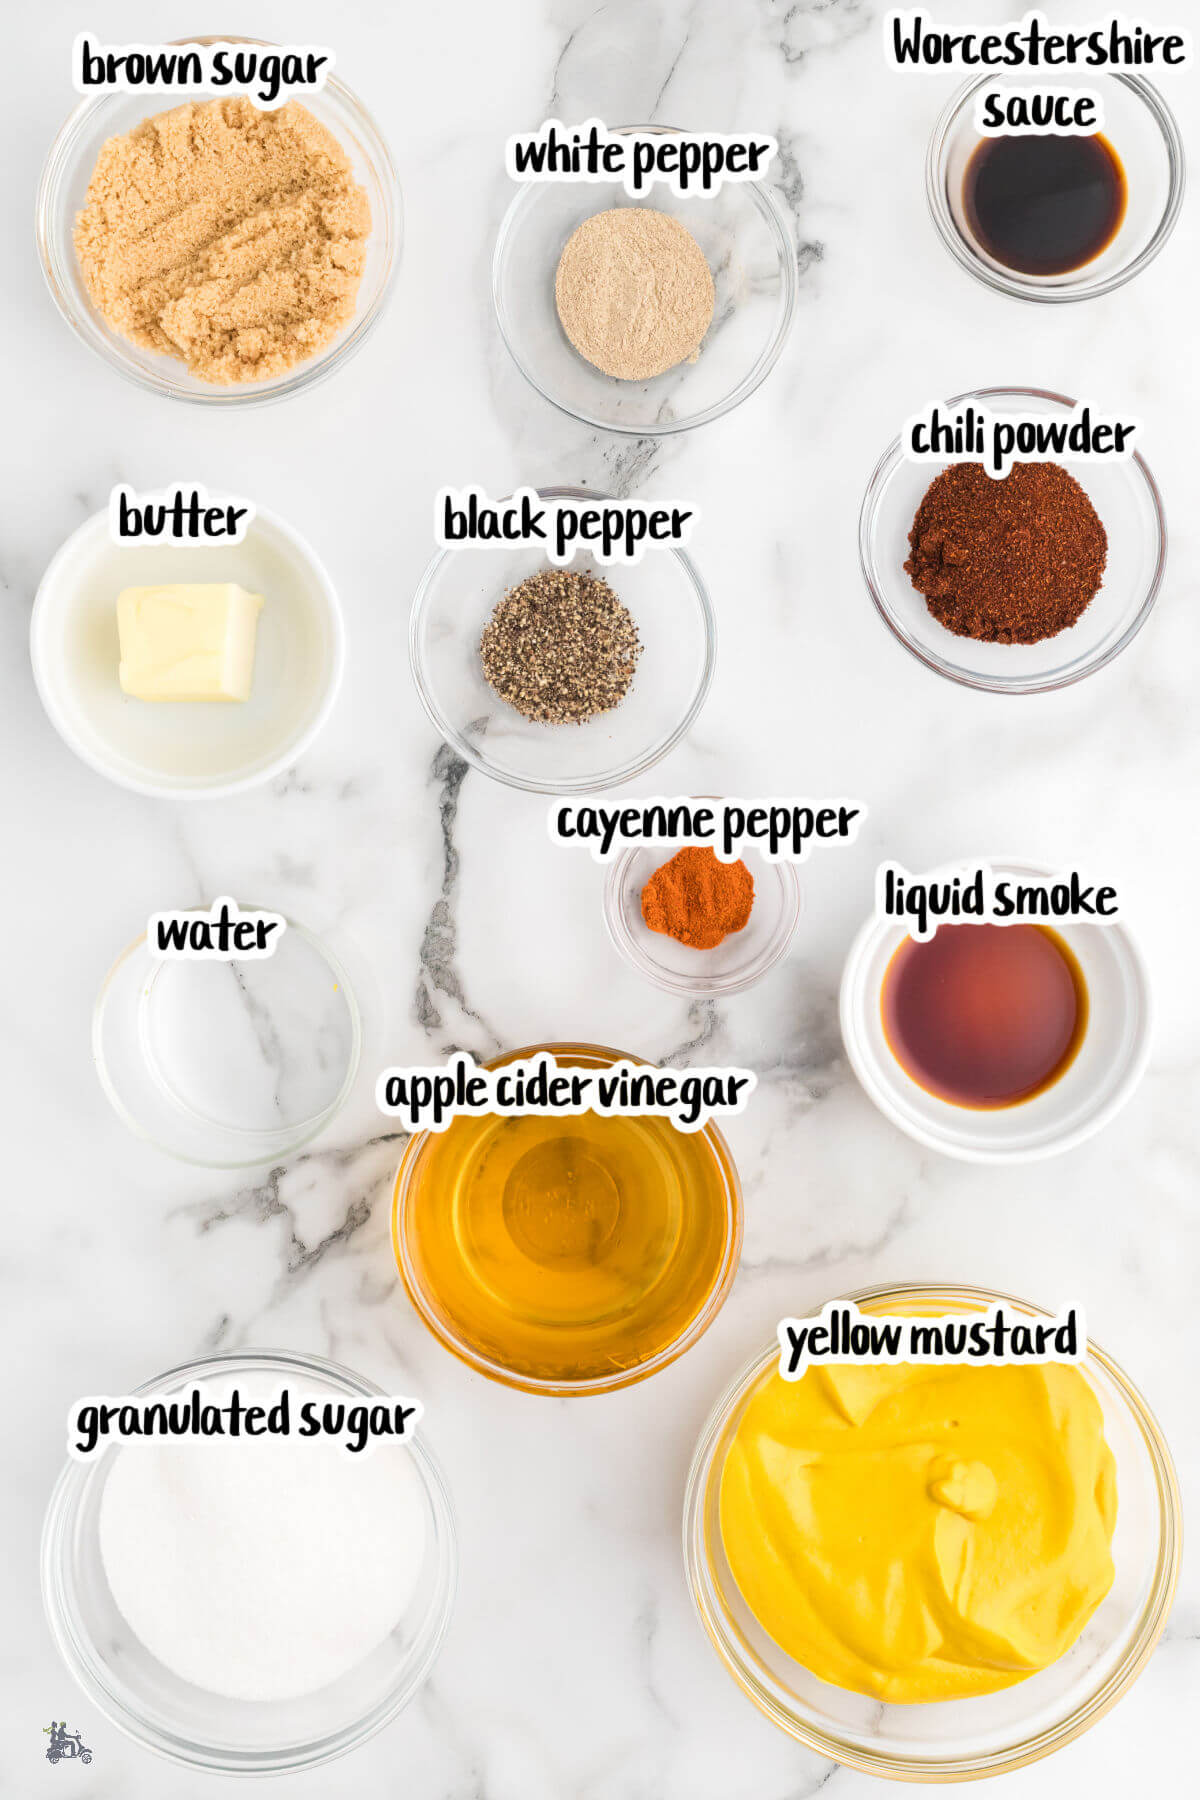 Image of the ingredients needed to make the golden Carolina Barbecue Sauce. 